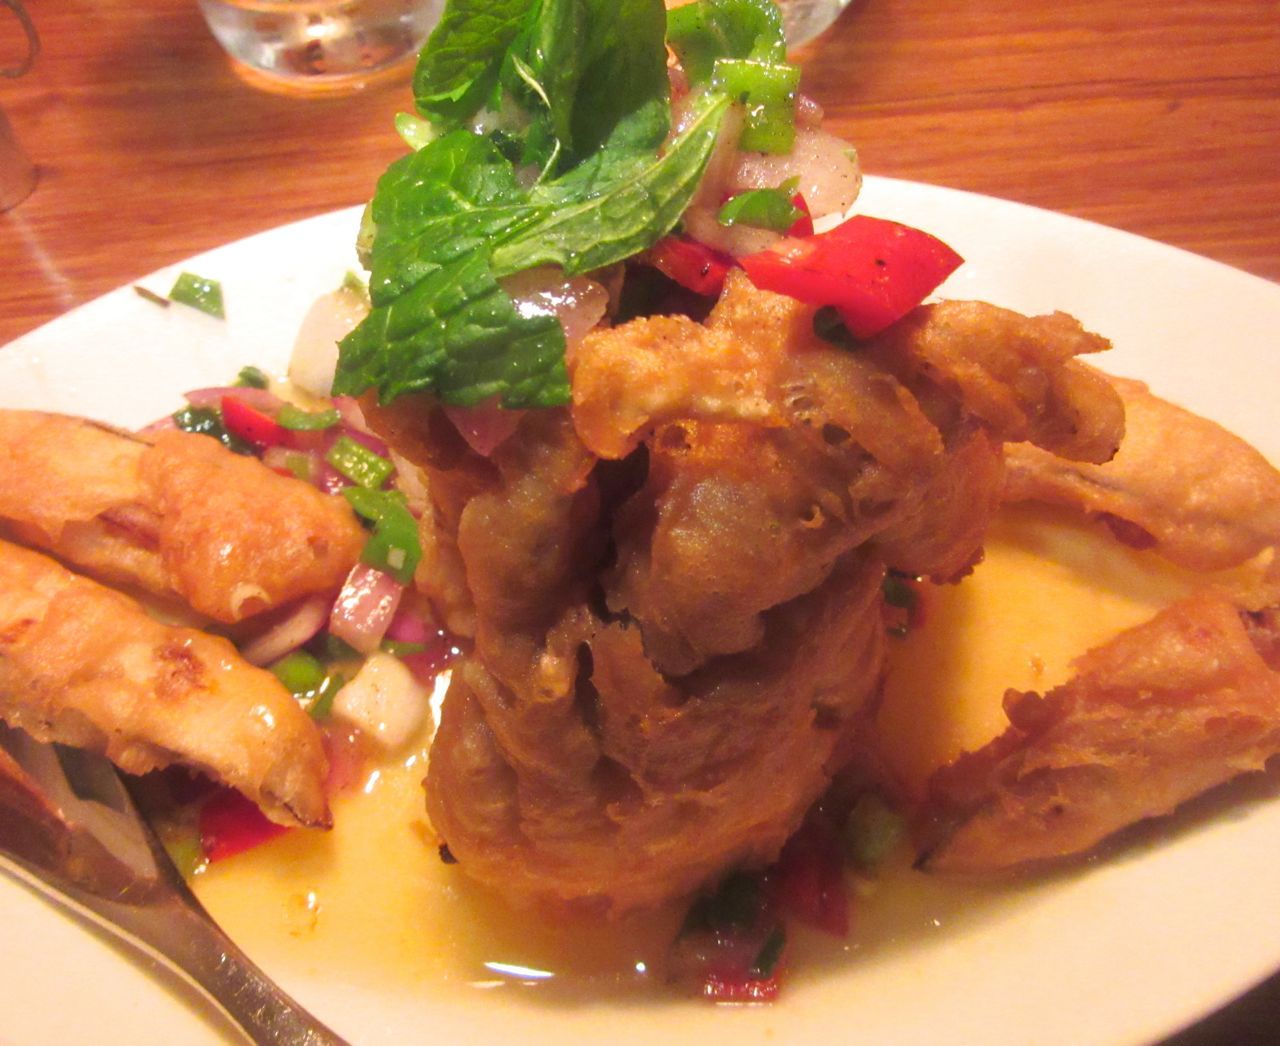 Soft shell crab at UWS Red Farm